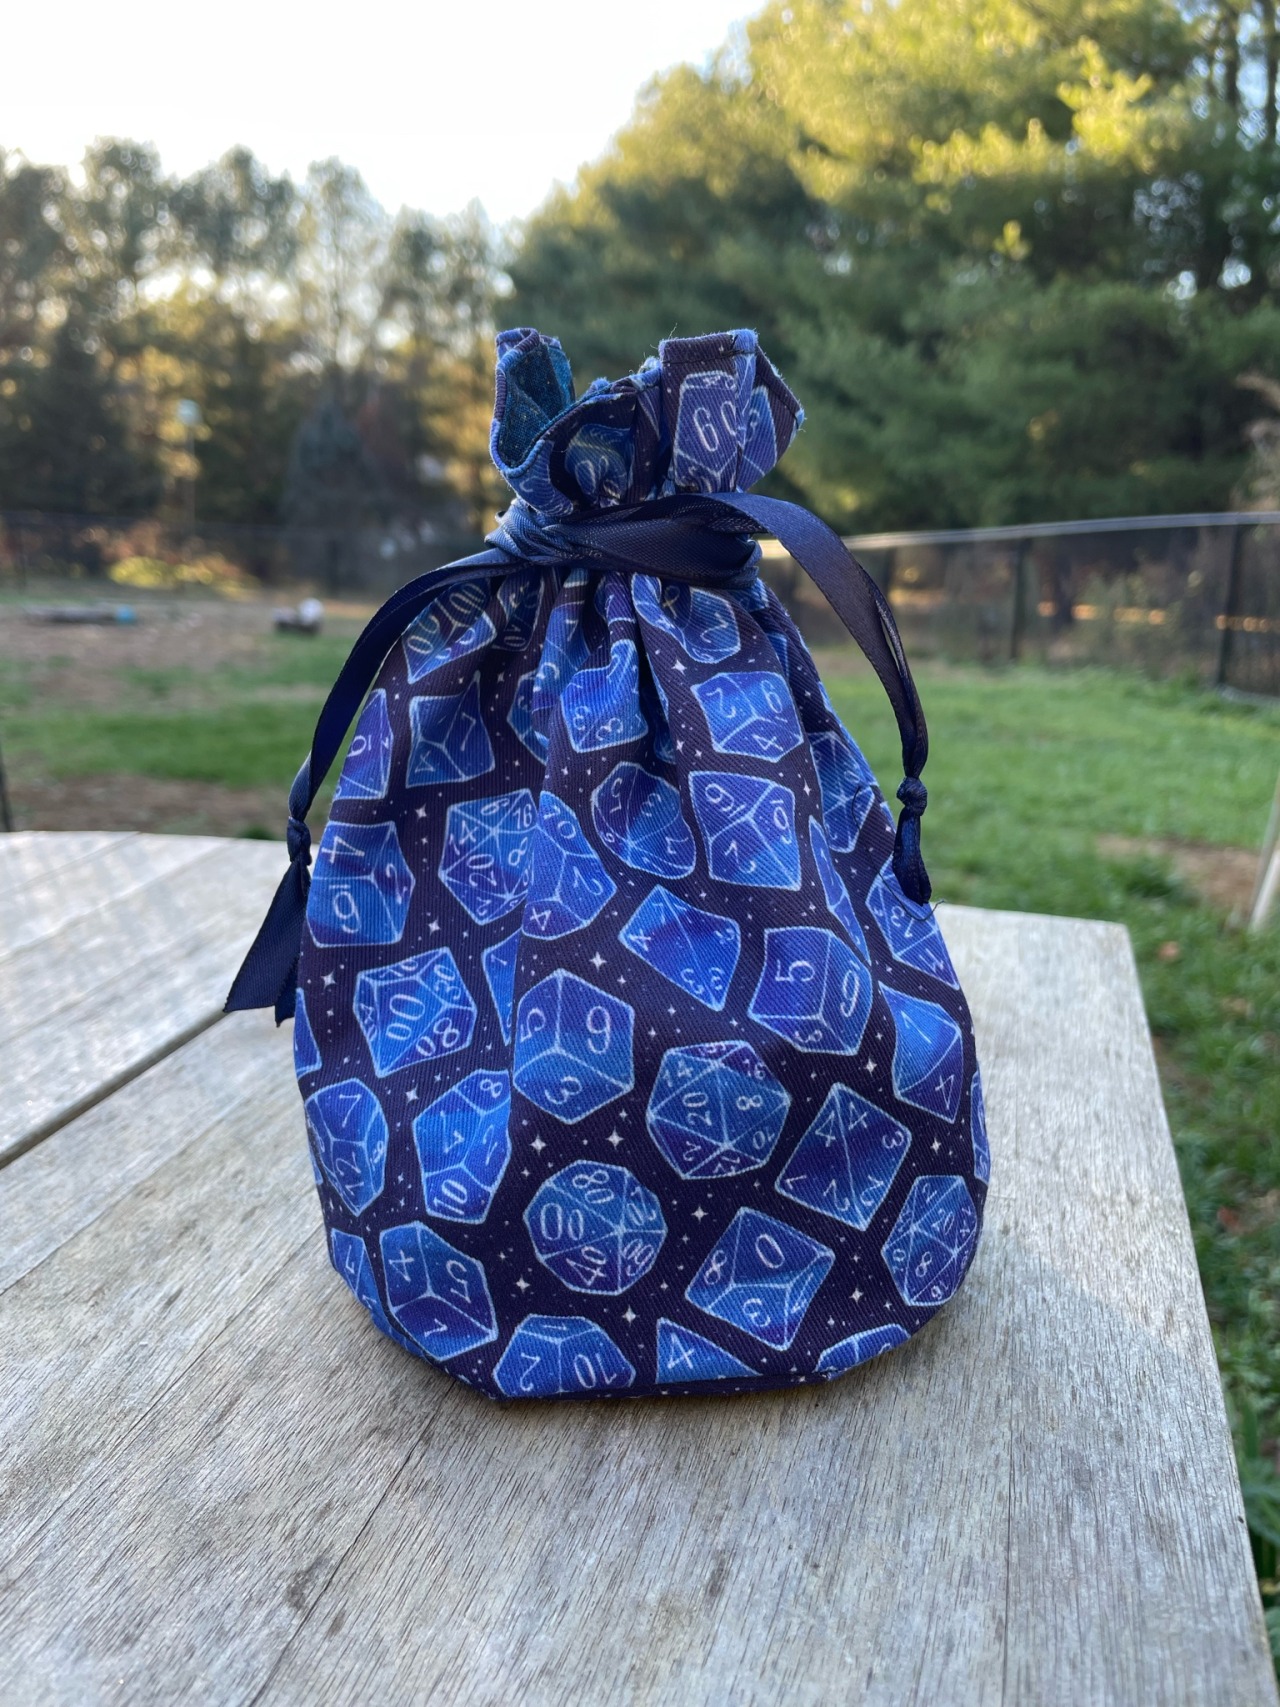 I made a dice bag from some cool custom fabric! adult photos